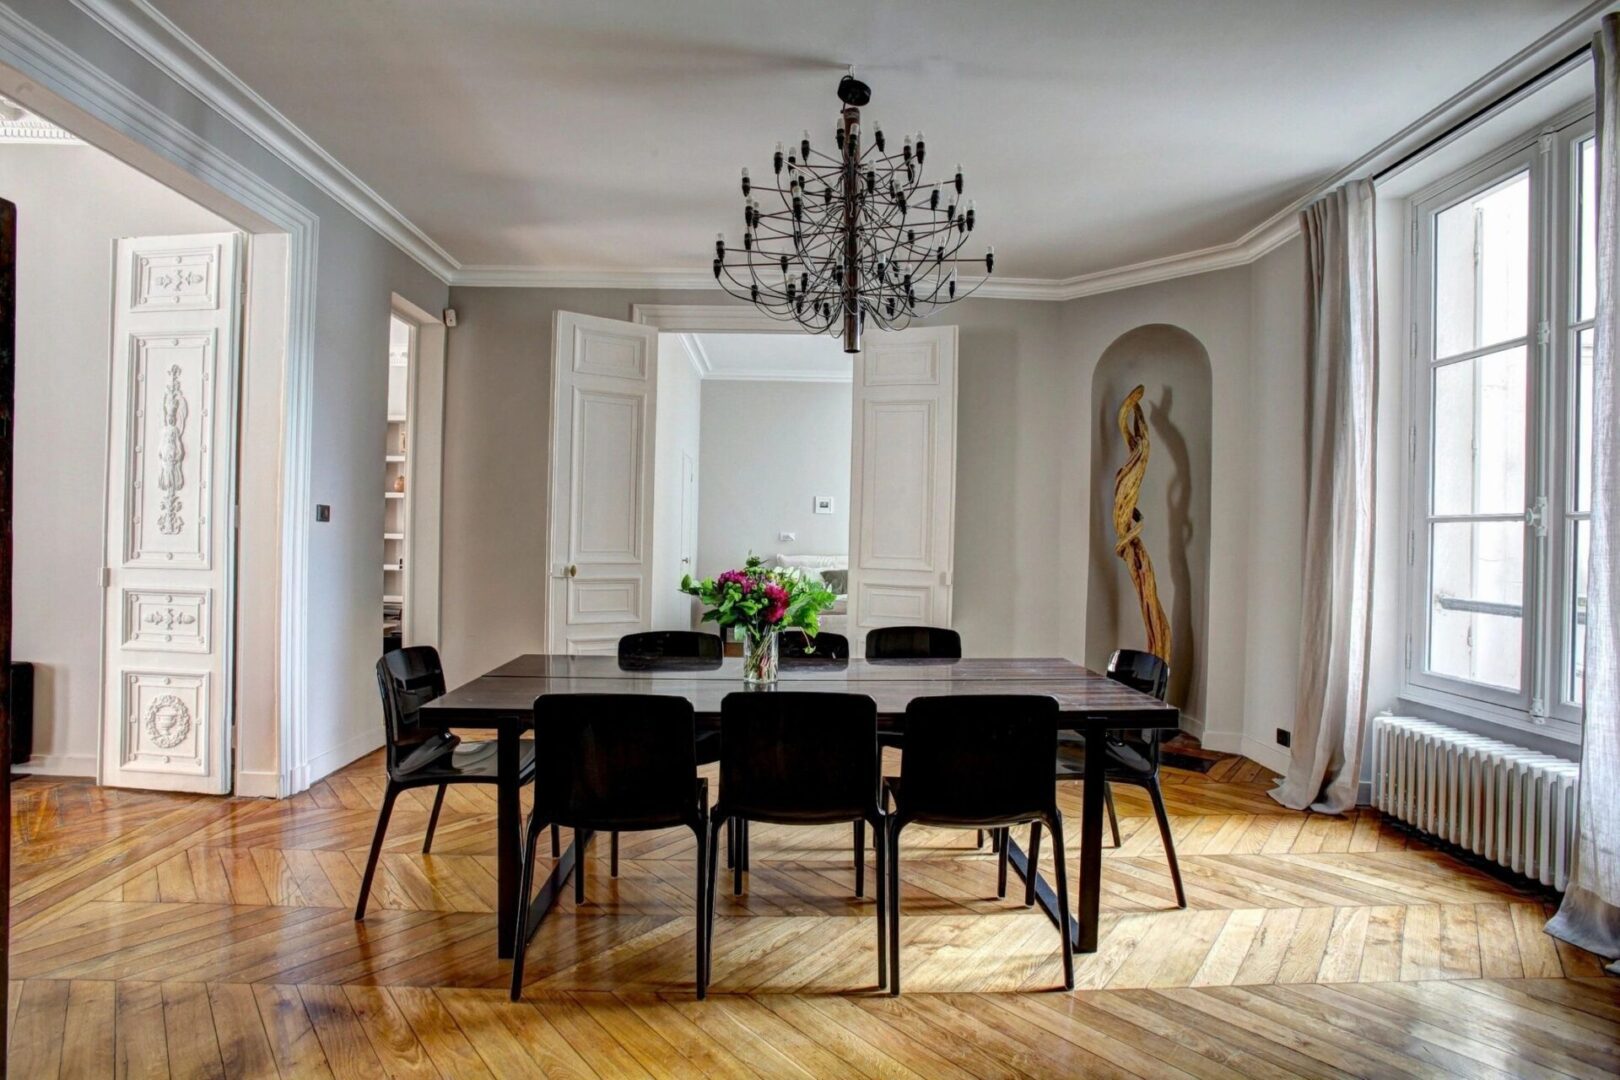 A dining room table with black chairs and chandelier.